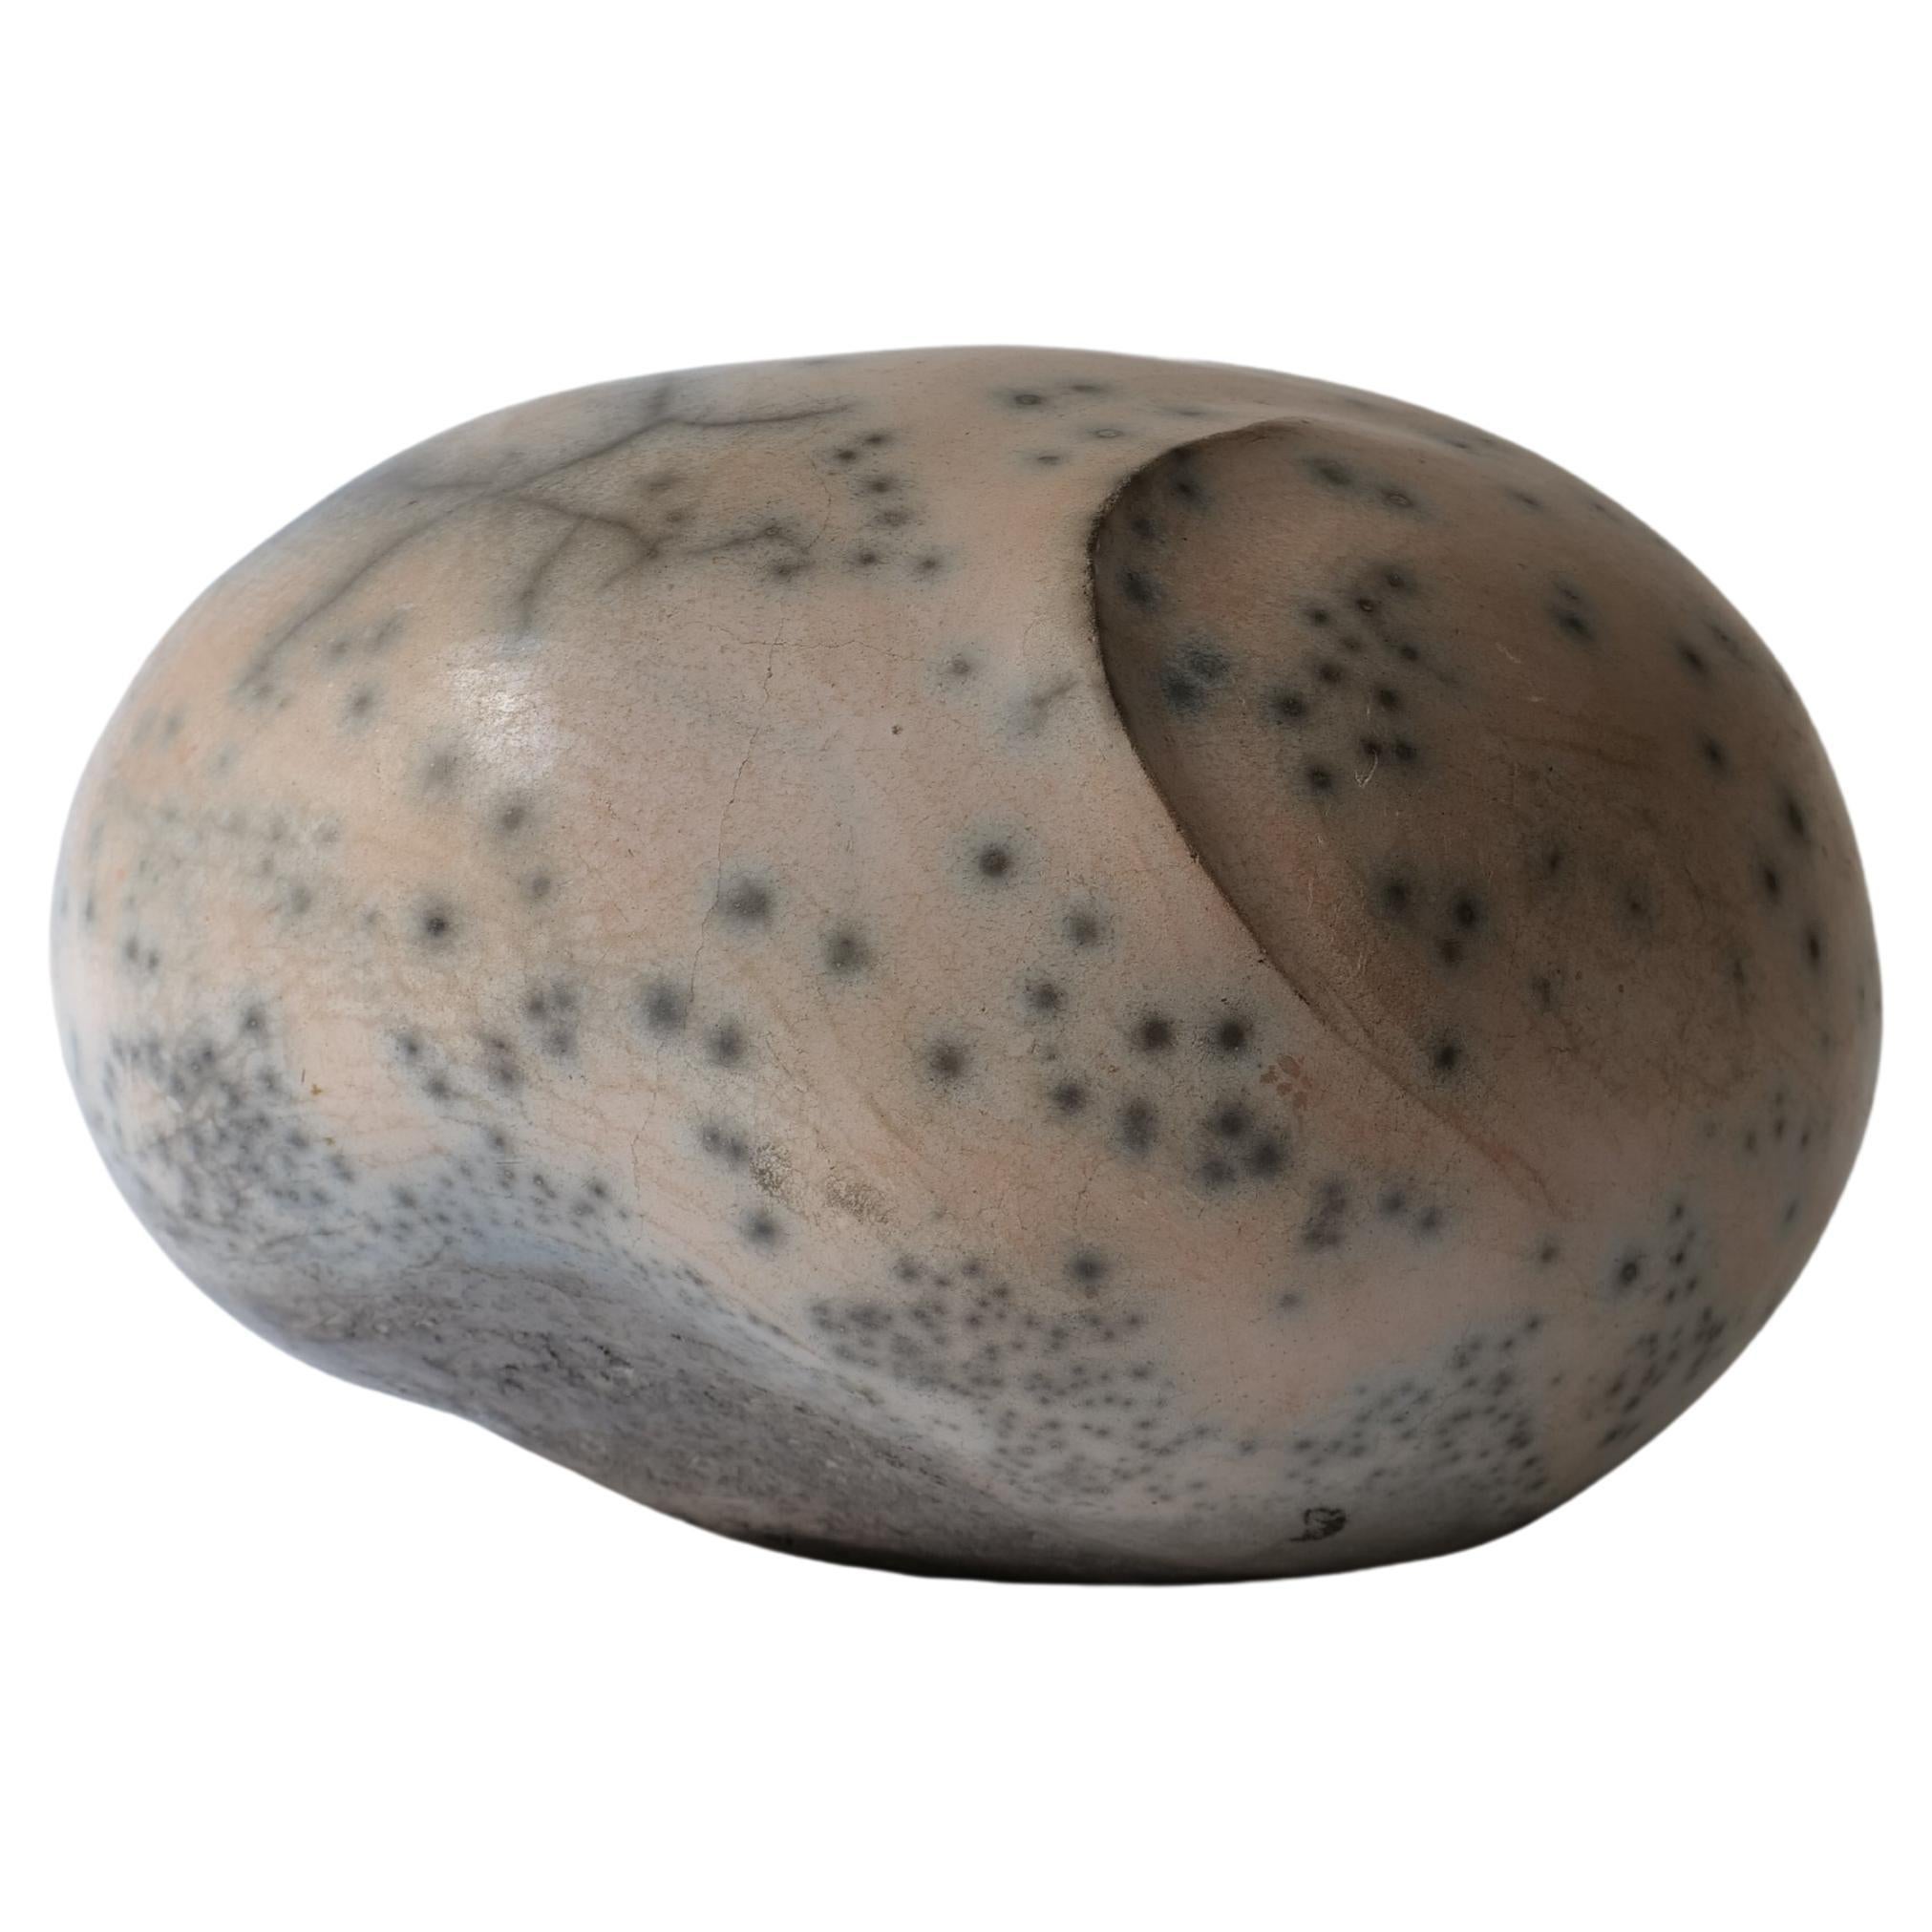 Contemporary French Polished Stoneware Ceramic Sculpture by Dominic Legros